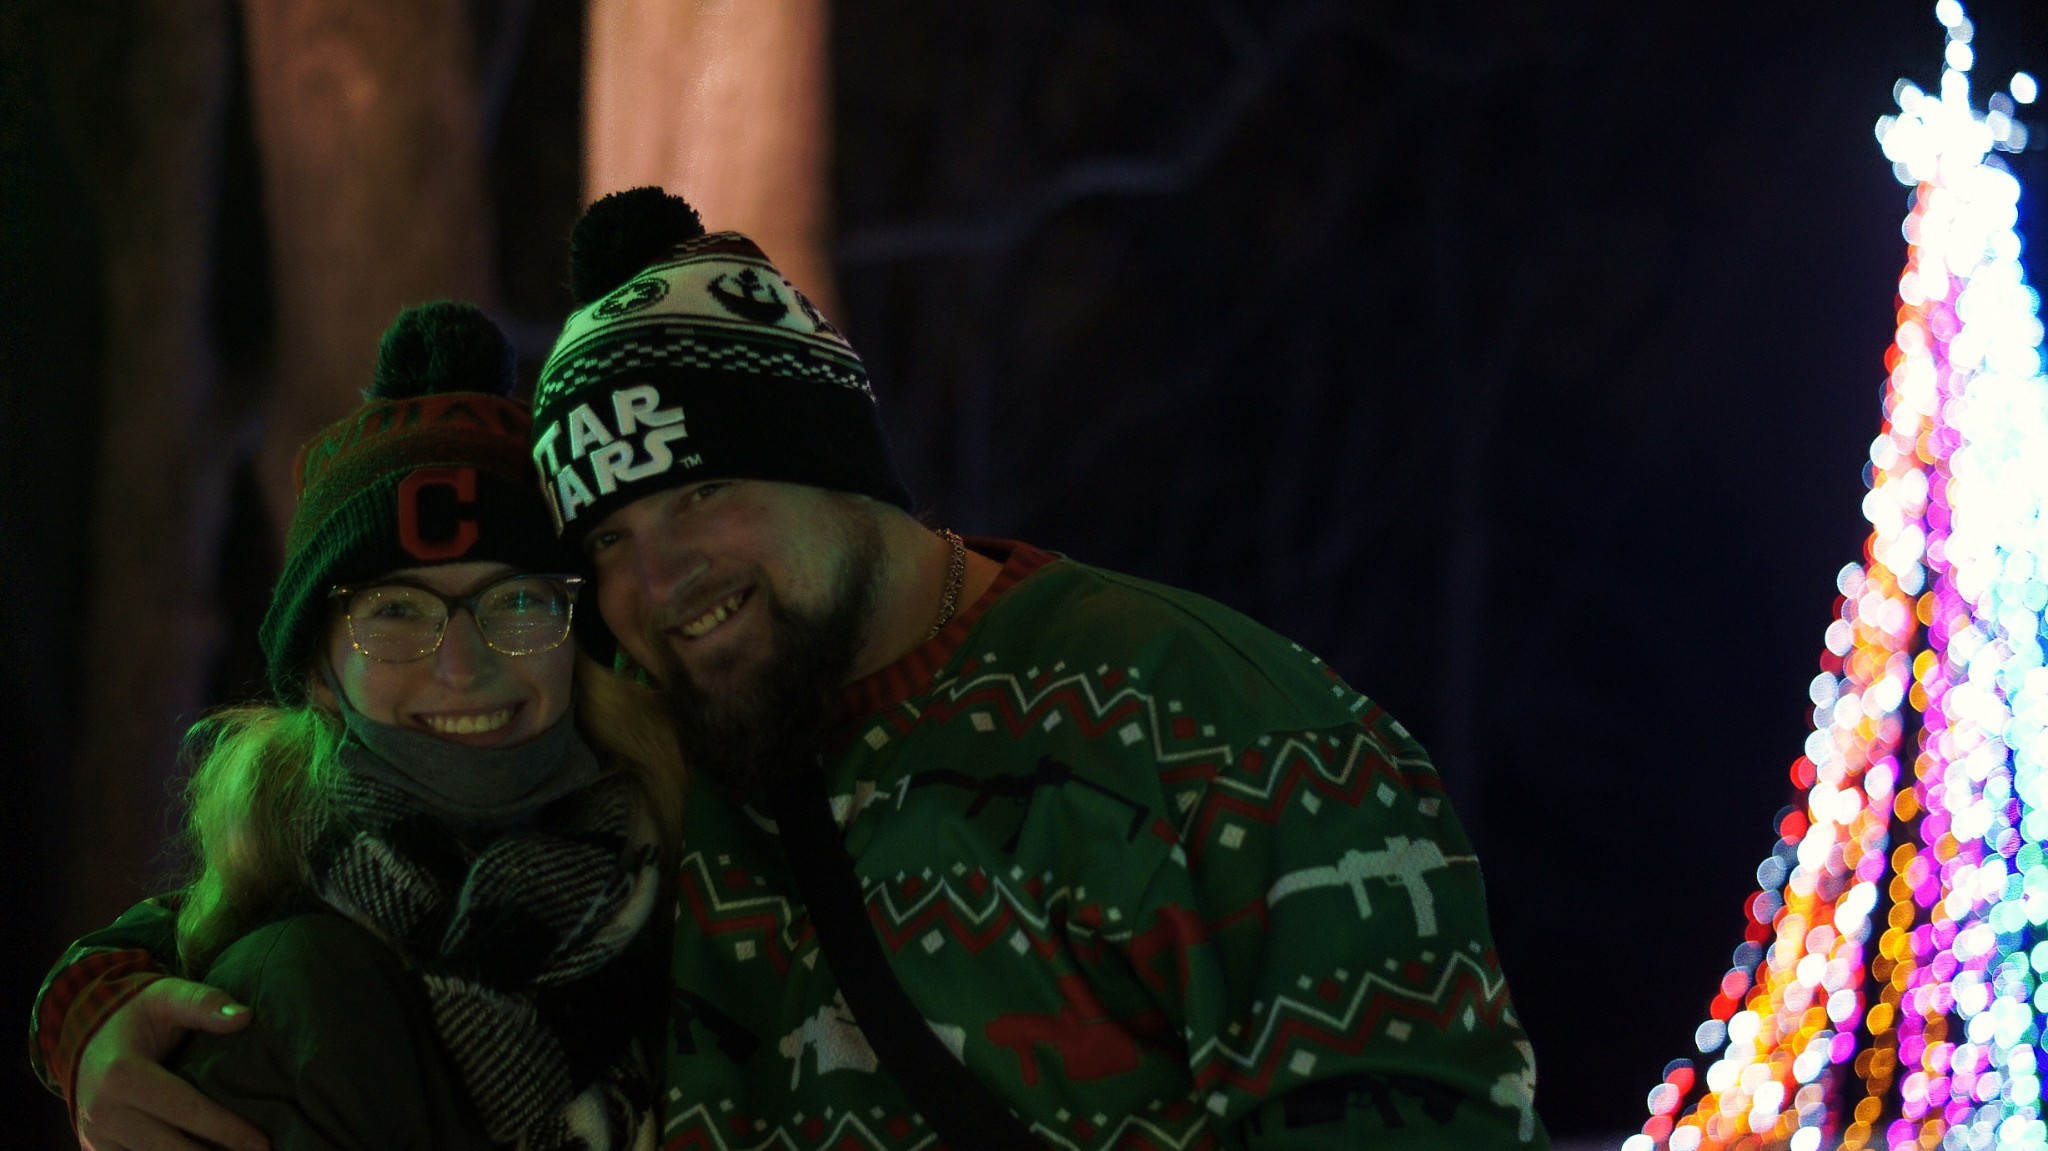 thingssthatmakemewet:‘Tis the season to be cheesin’ 😄🥰🎄@mossyoakmaster and I went on a double date to see Christmas lights on Friday and I’ve found my new favorite pictures of us together 🥺🥰😍💖 It was an amazing night